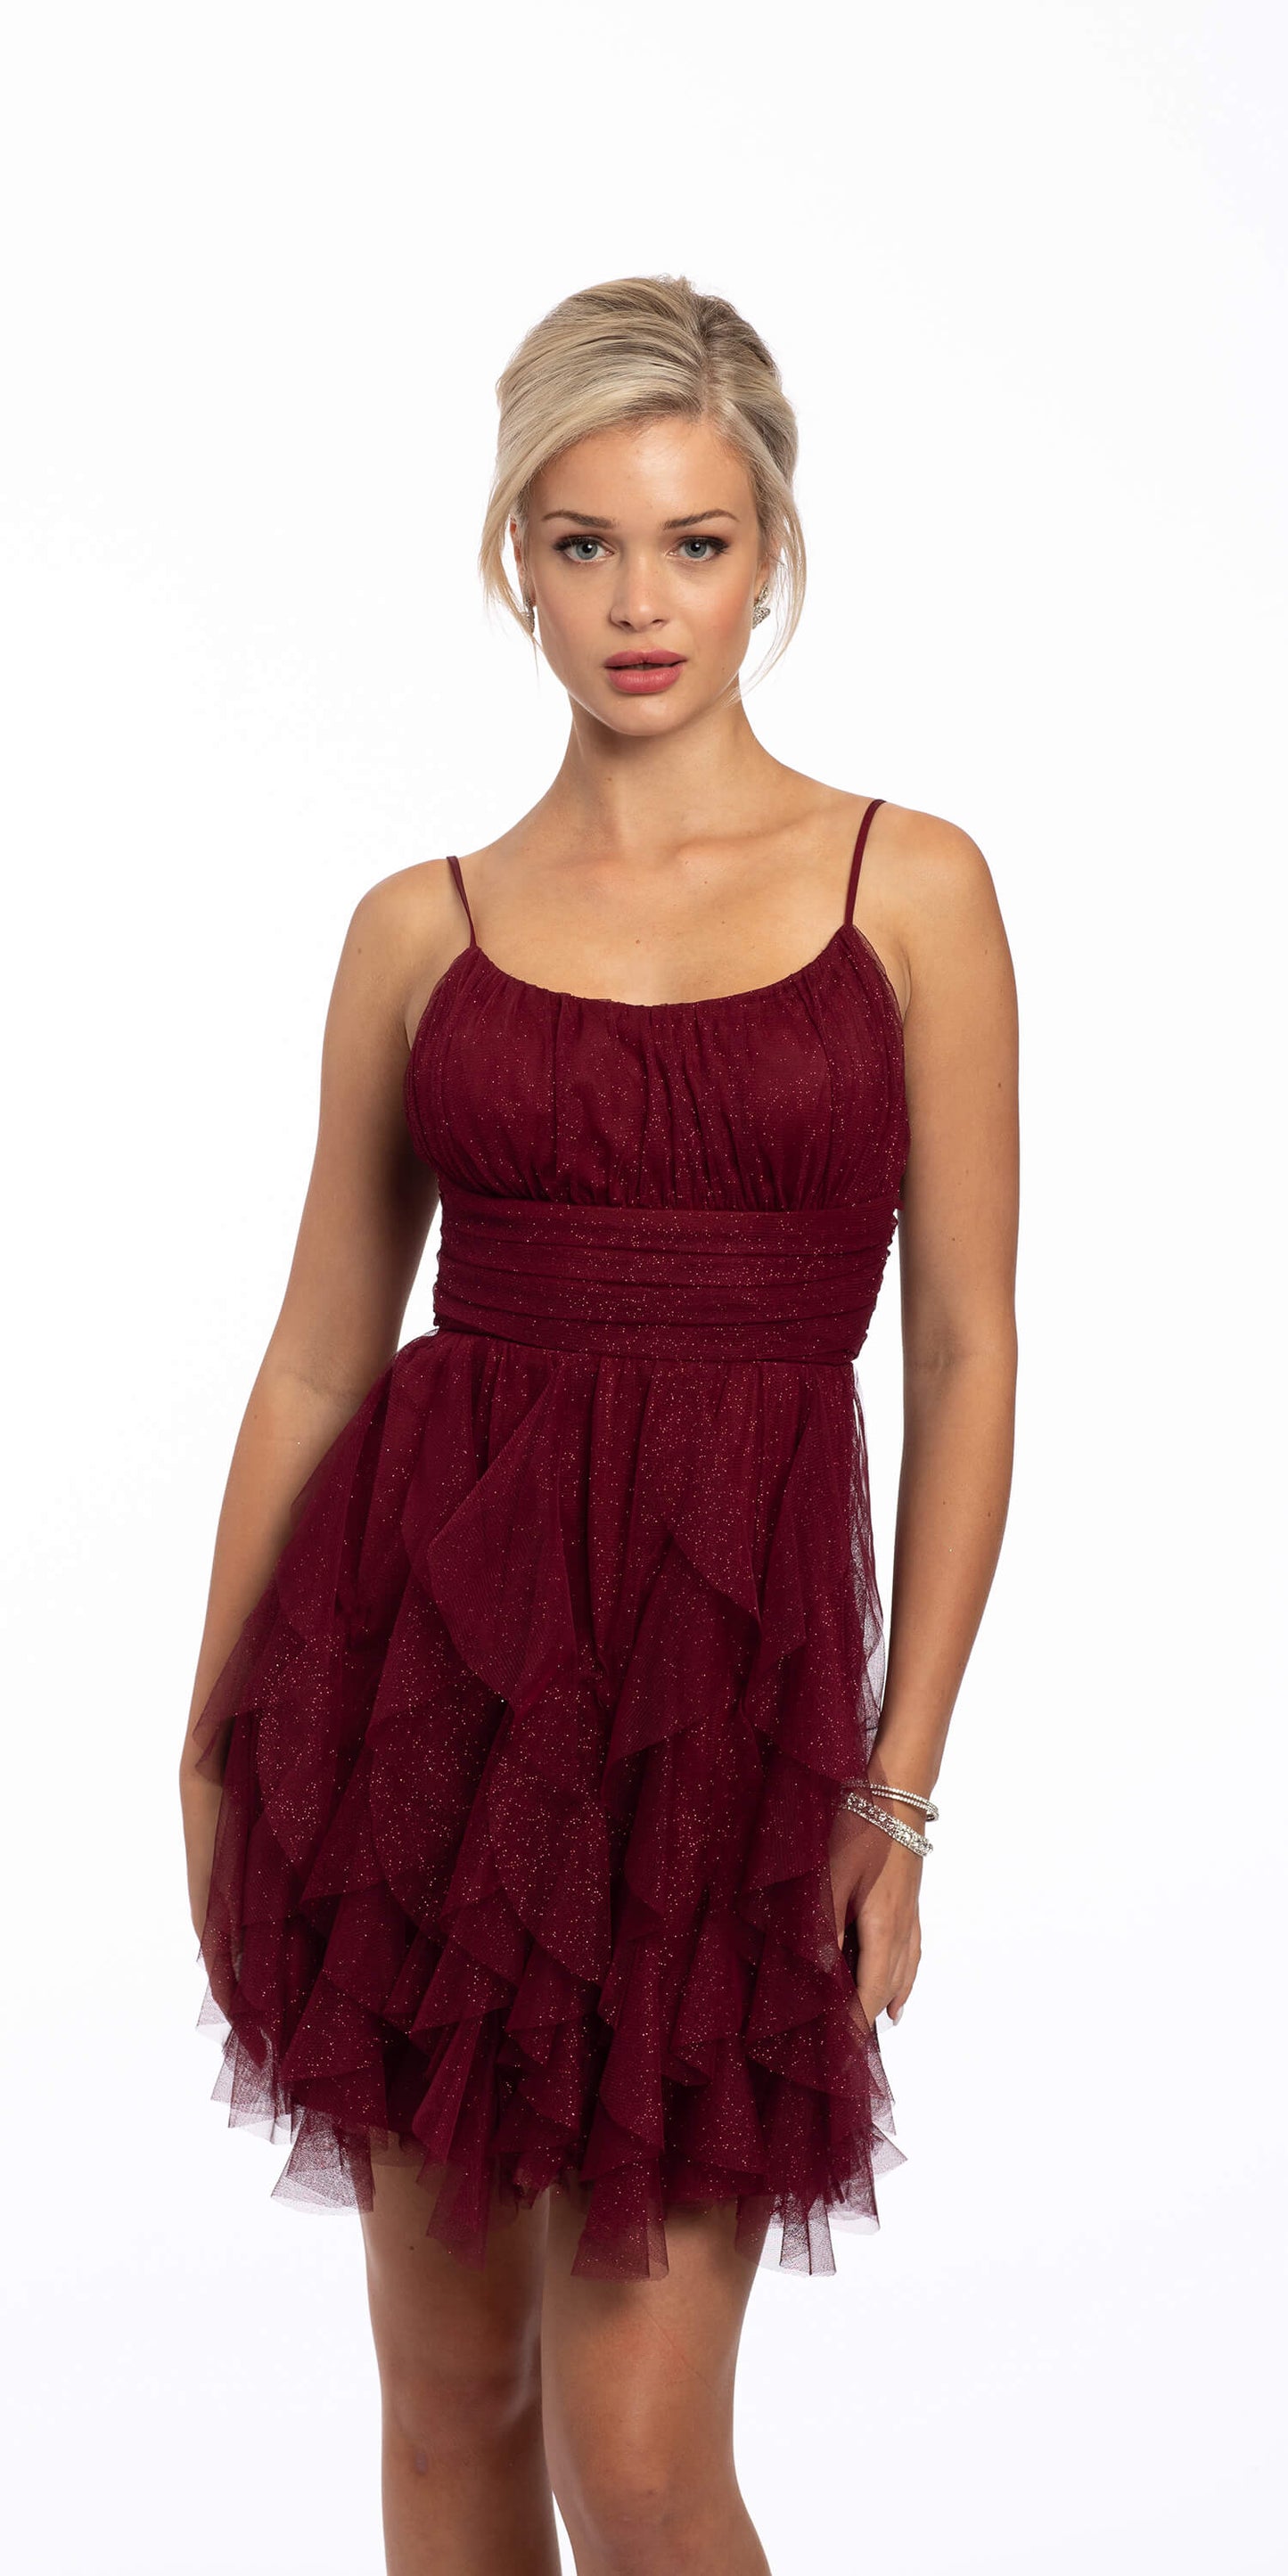 Camille La Vie Rouched Glitter lace Up Back with Corkscrew Skirt missy / 4 / burgundy